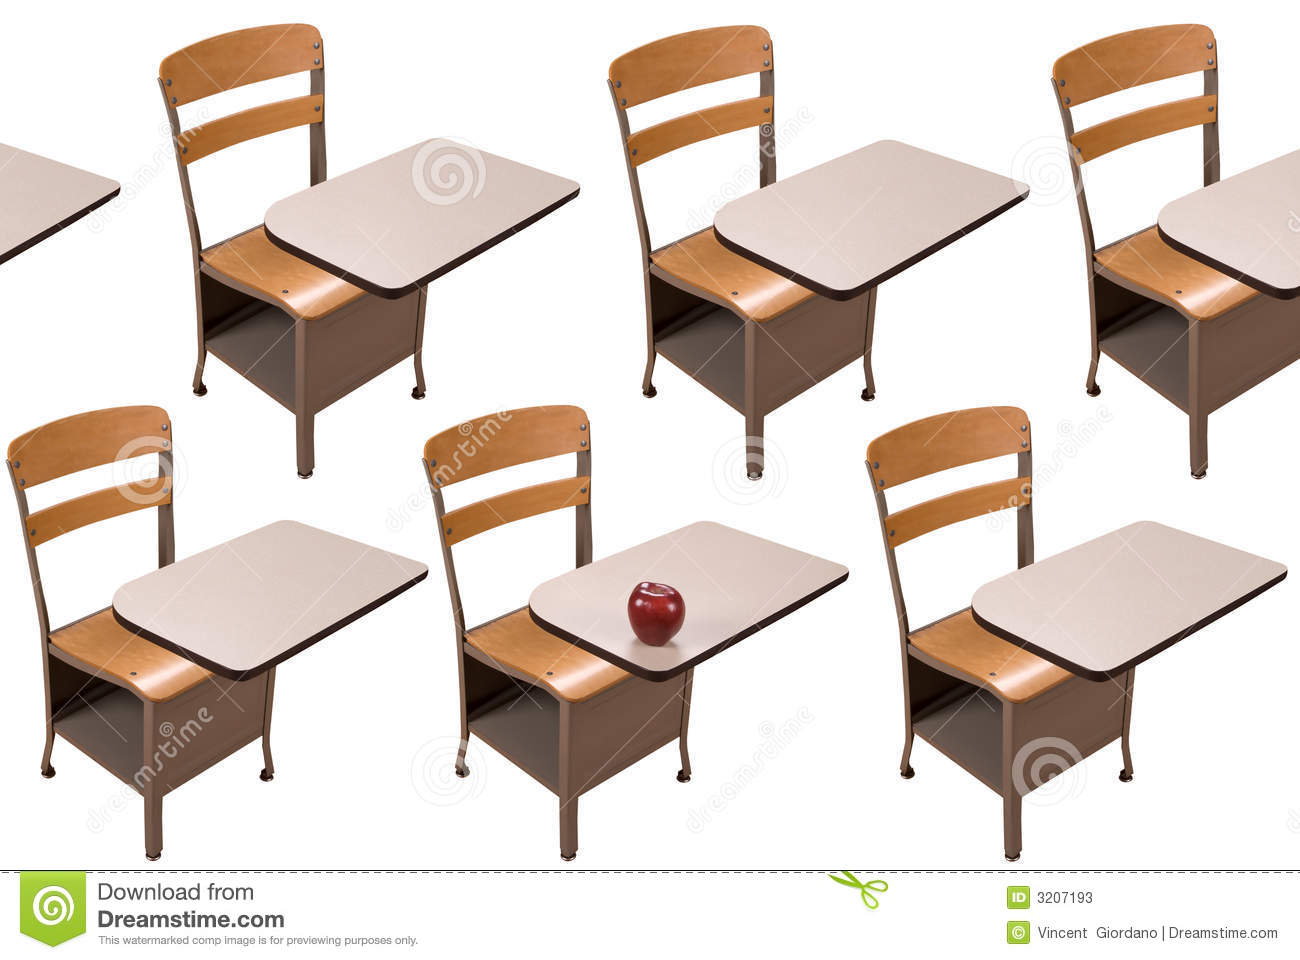 School Desks In Rows And One Desk With An Apple Isolated Over A White